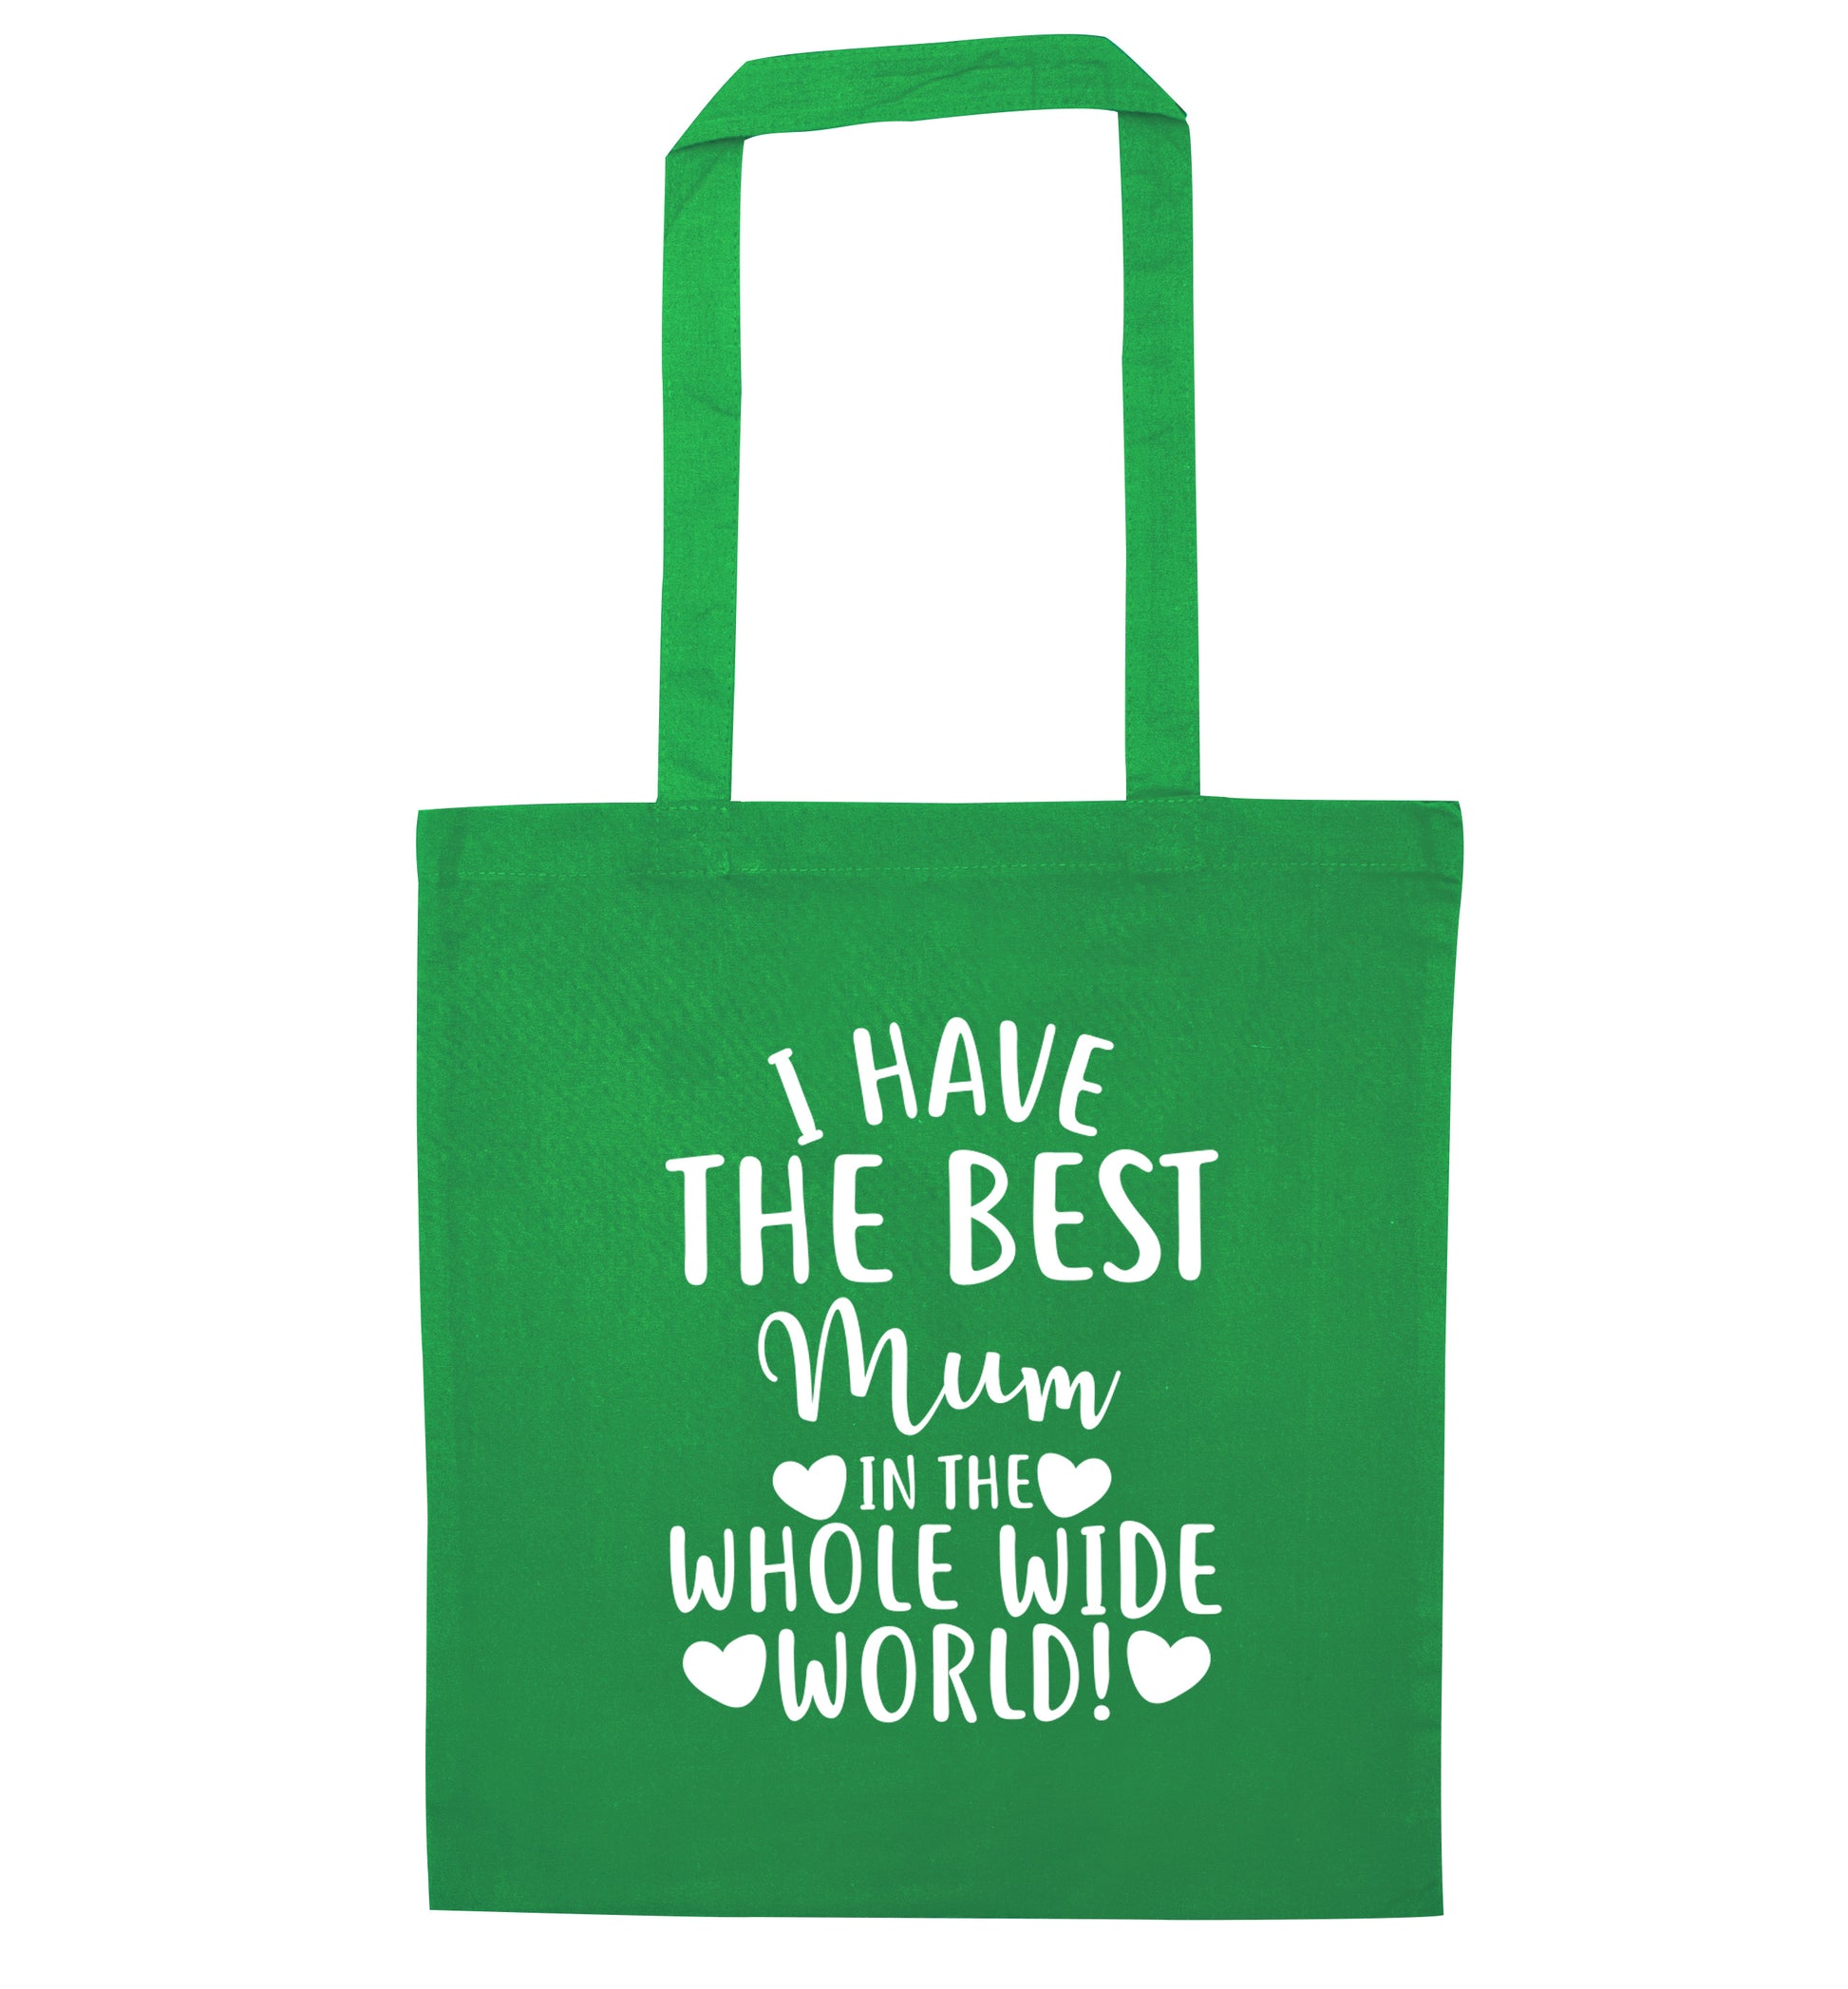 I have the best mum in the whole wide world! green tote bag